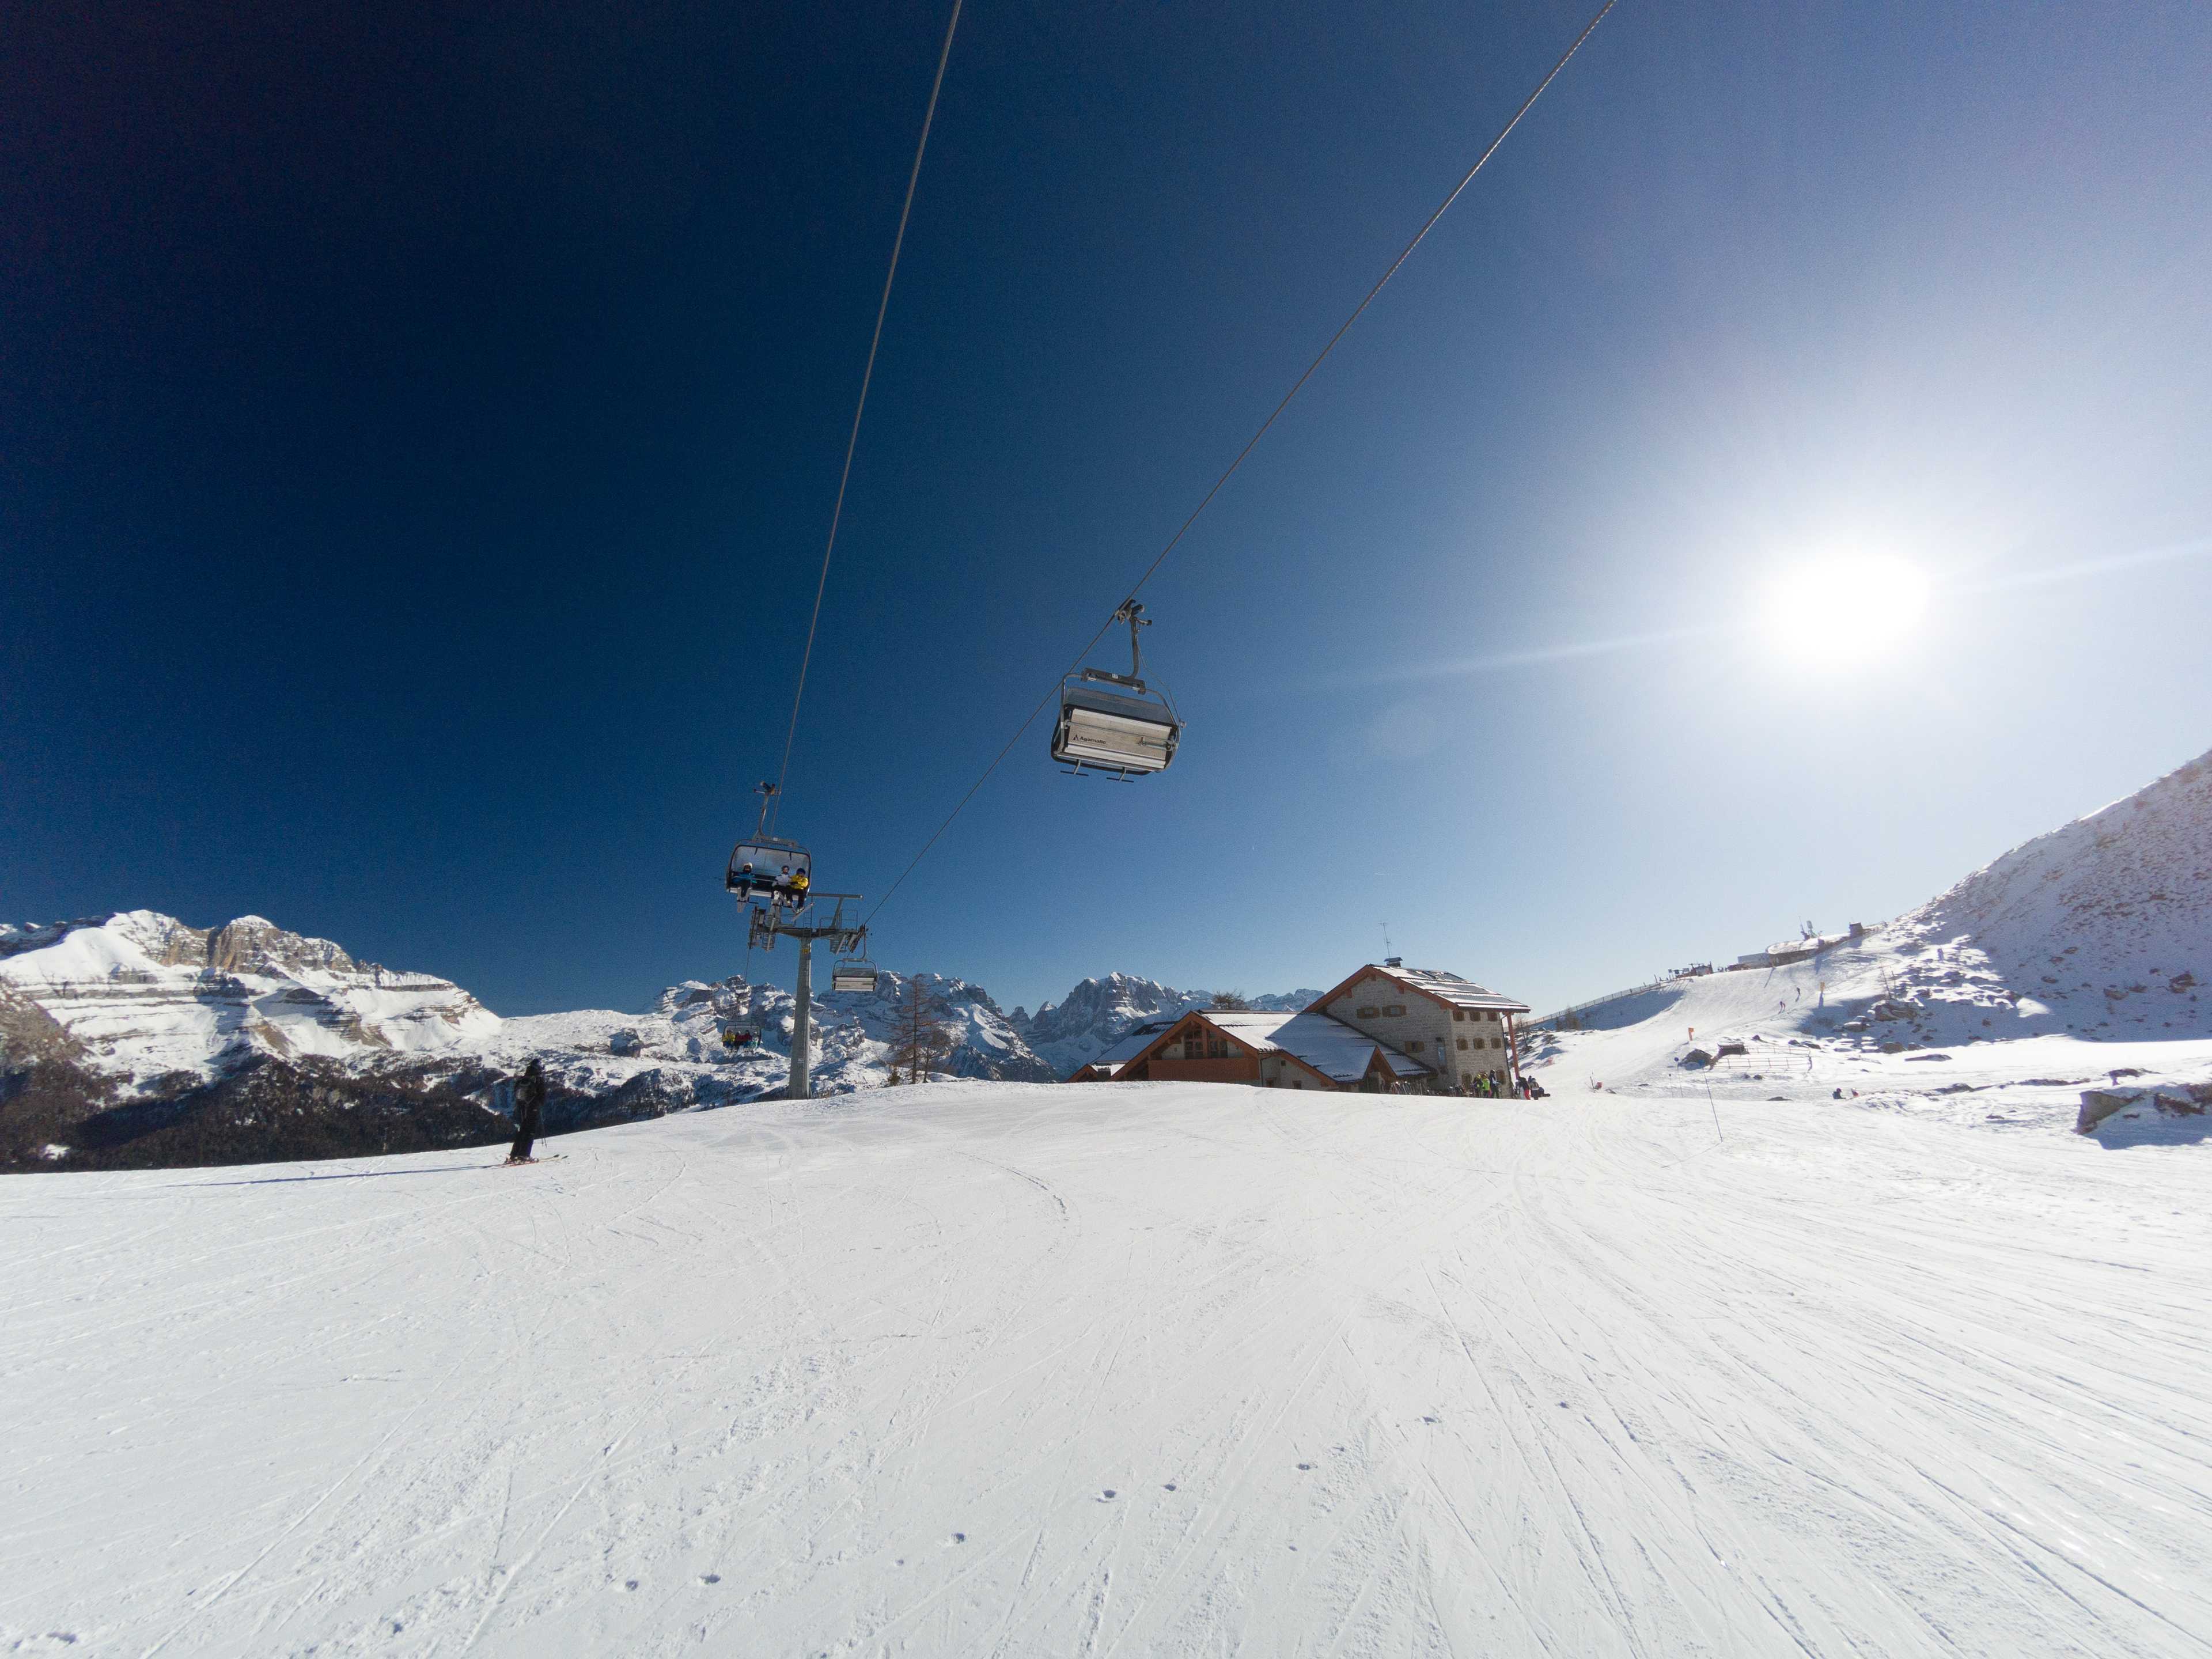 Fortini Express chairlift, replaced with a gondola lift in 2020, Madonna di Campiglio